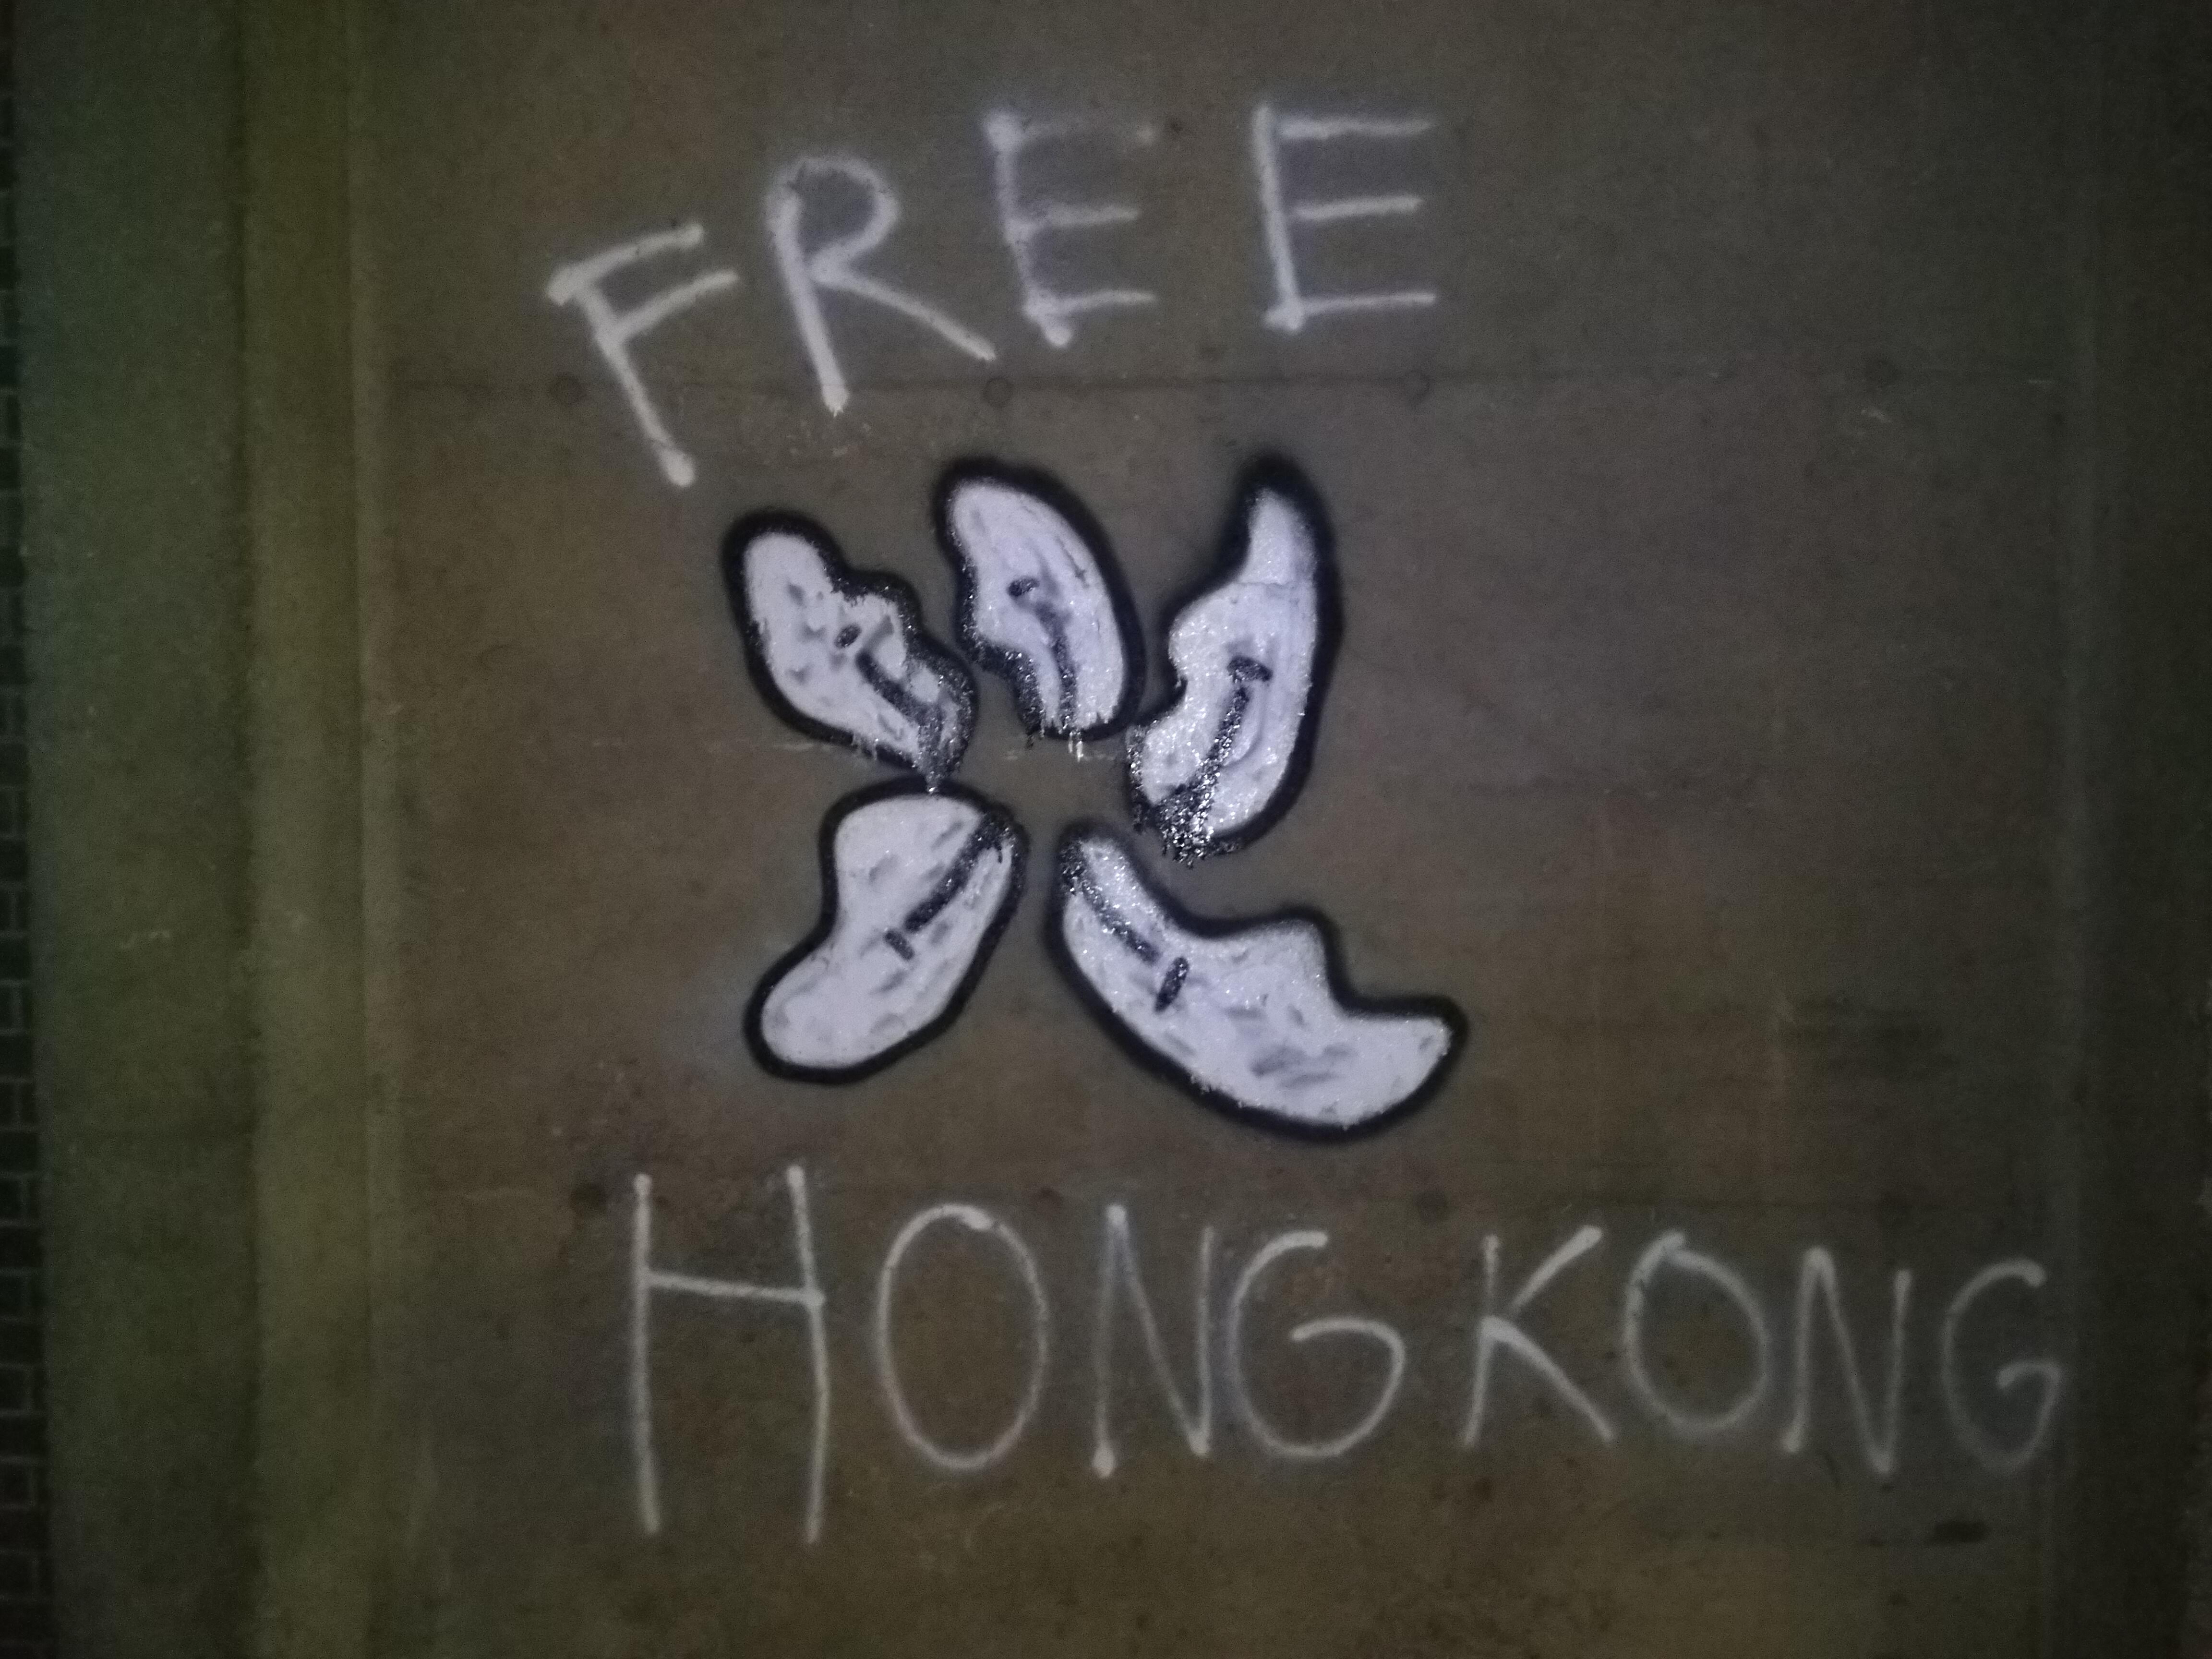 Image For Post | https://www.reddit.com/r/HongKong/comments/cv0ws4/how_can_you_help_hong_kong_protests_from_abroad/